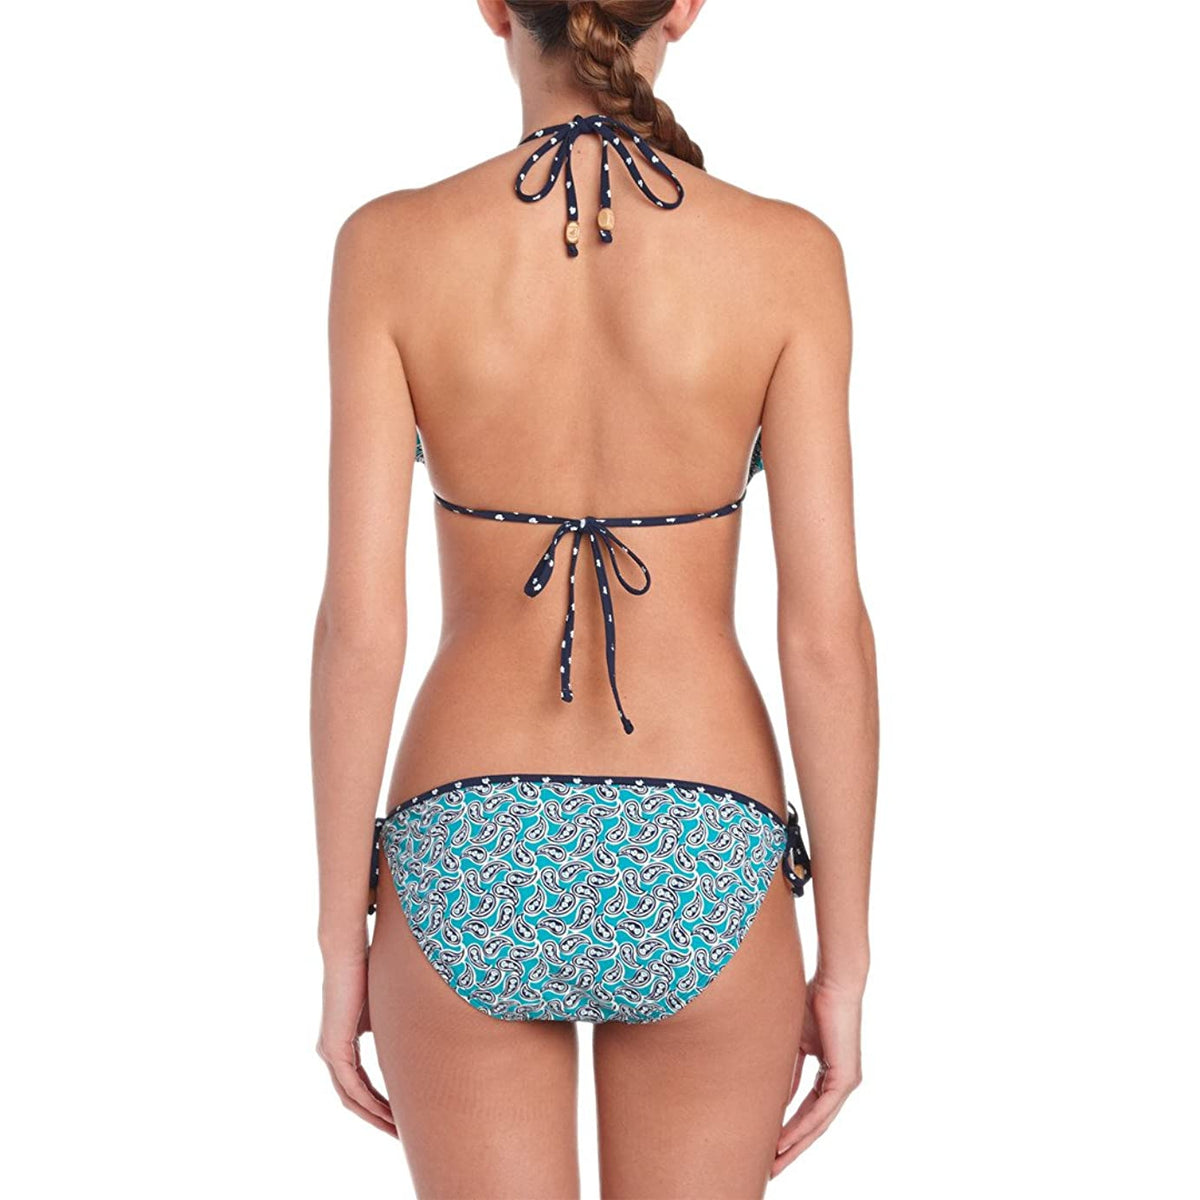 Marrakesh Medley String Triangle Top